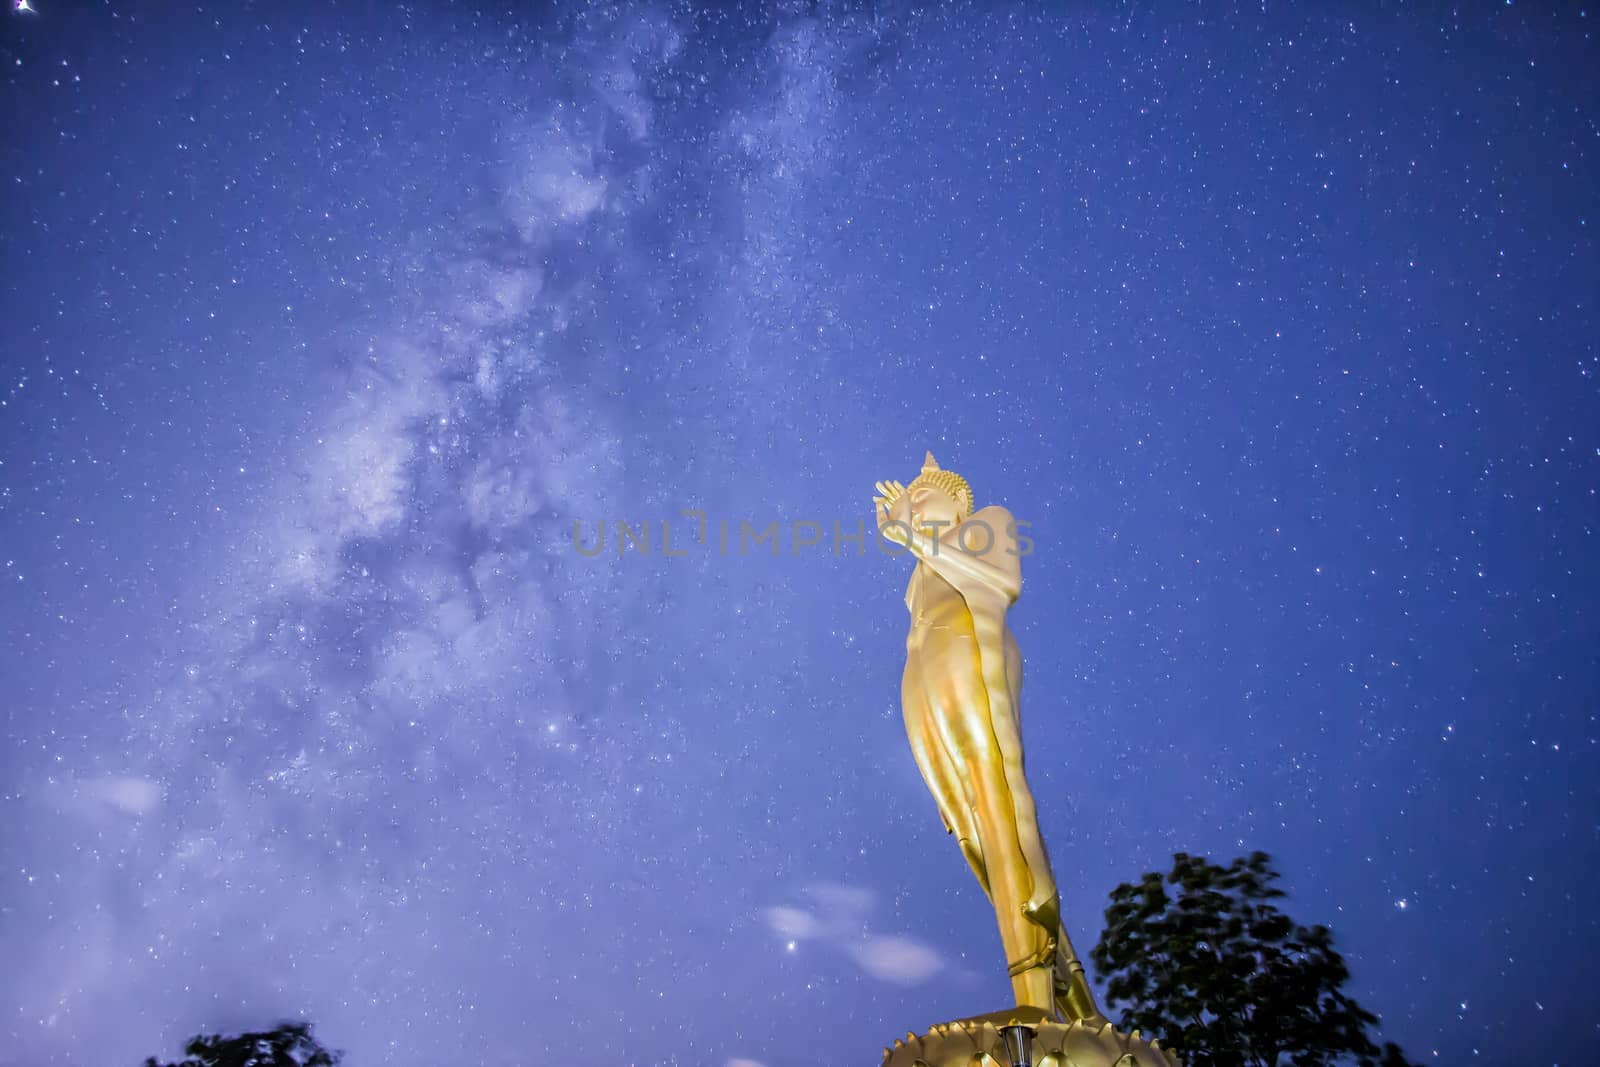 Buddha statue on the milky way background in Thailand